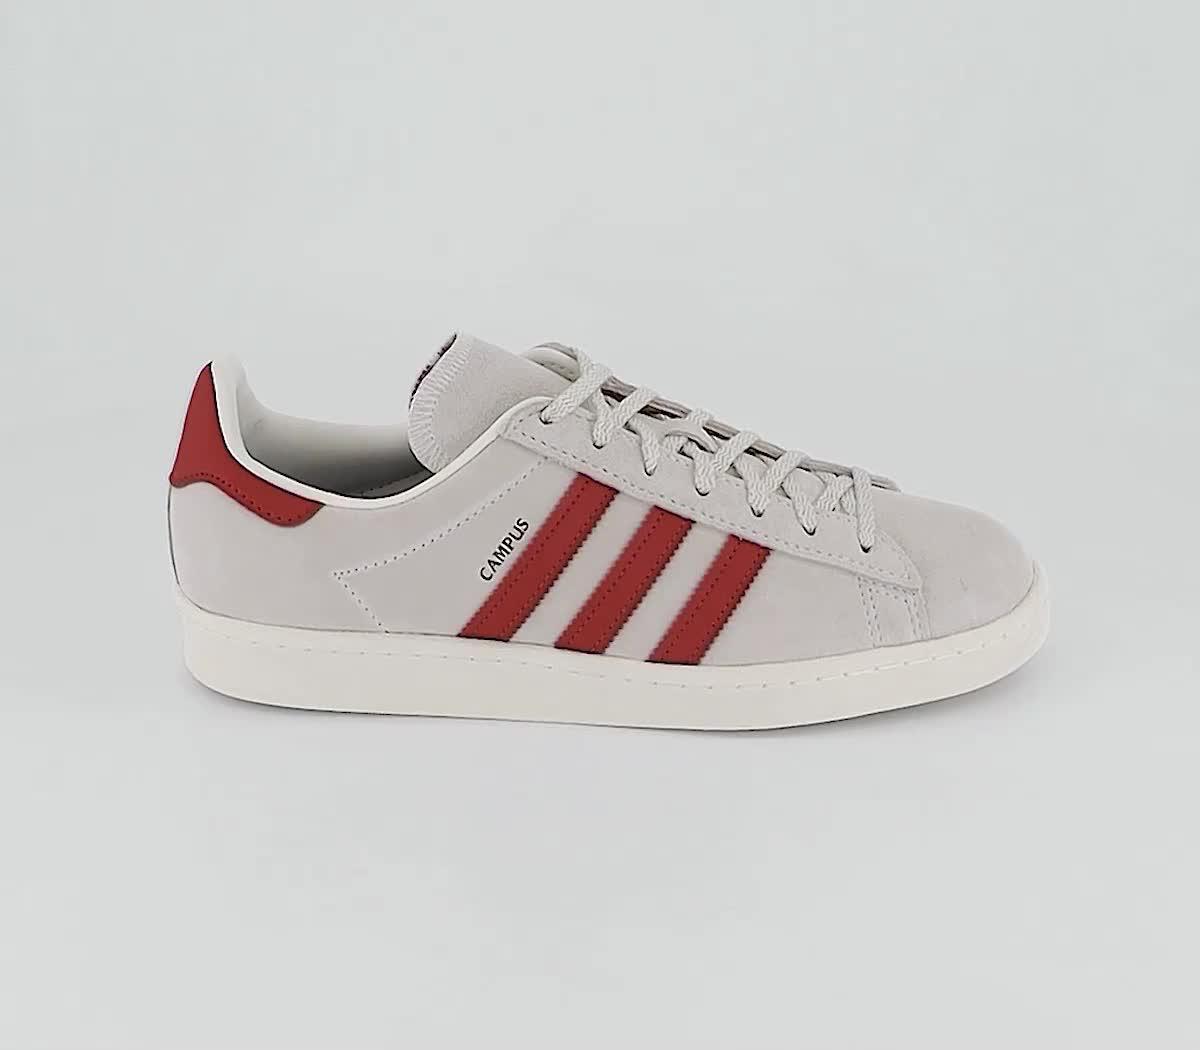 roterende rør Anslået adidas Campus 80s Trainers Off White Collegiate Red - Men's Trainers